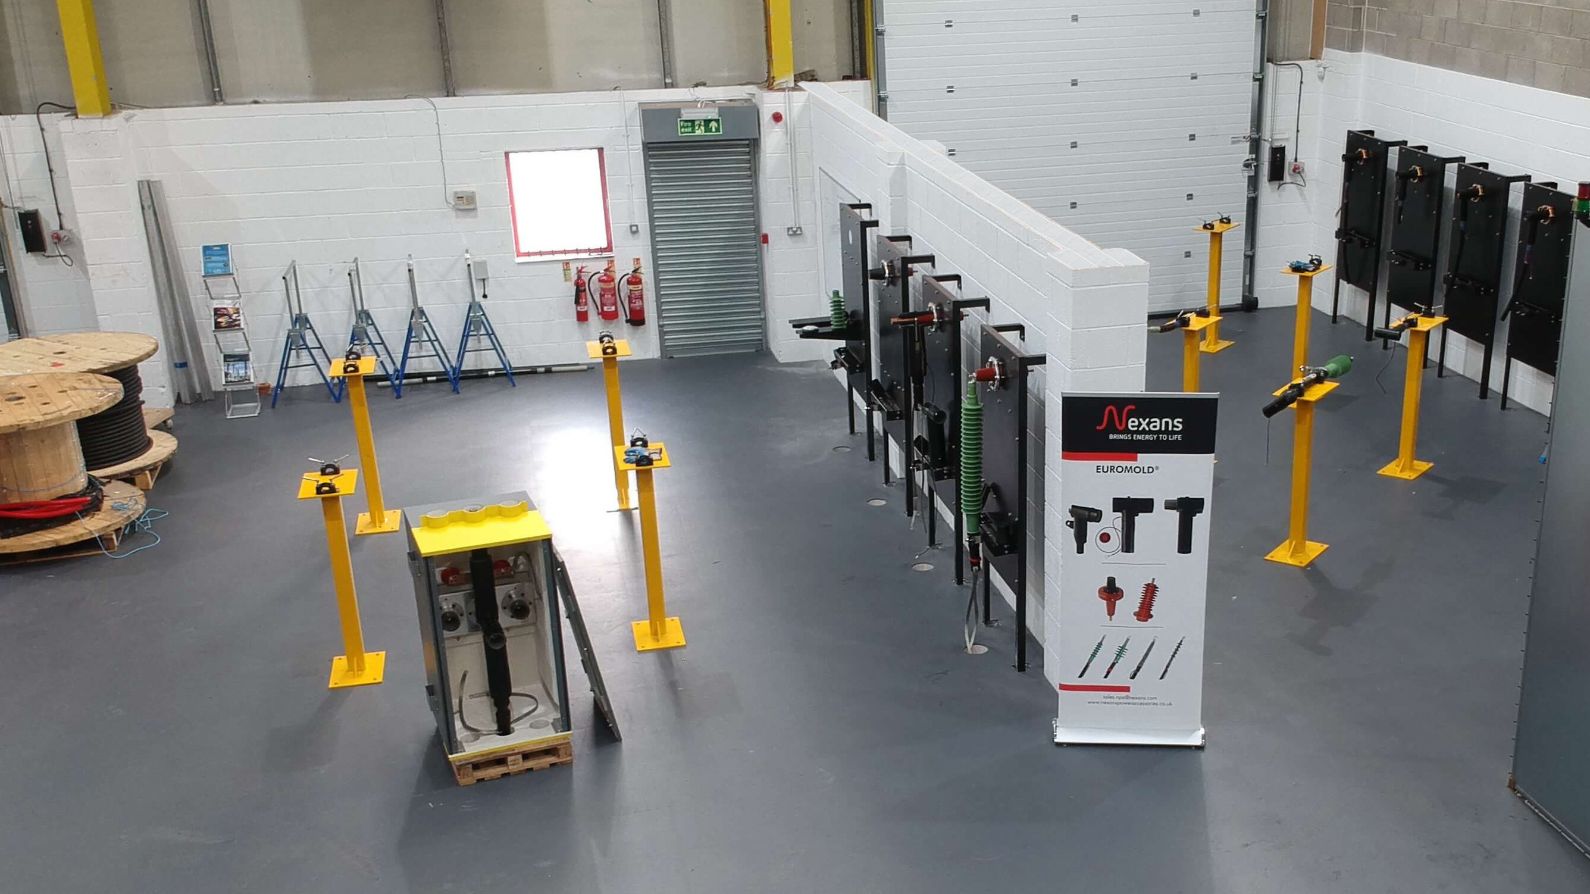 Working with Nexans UK Jointer Training Centre, Thorne & Derrick can provide standard and tailored Competency Courses – the courses cover cable construction, cable preparation plus the installation of heat shrink/cold shrink, push on terminations, Euromold separable connectors and joints.